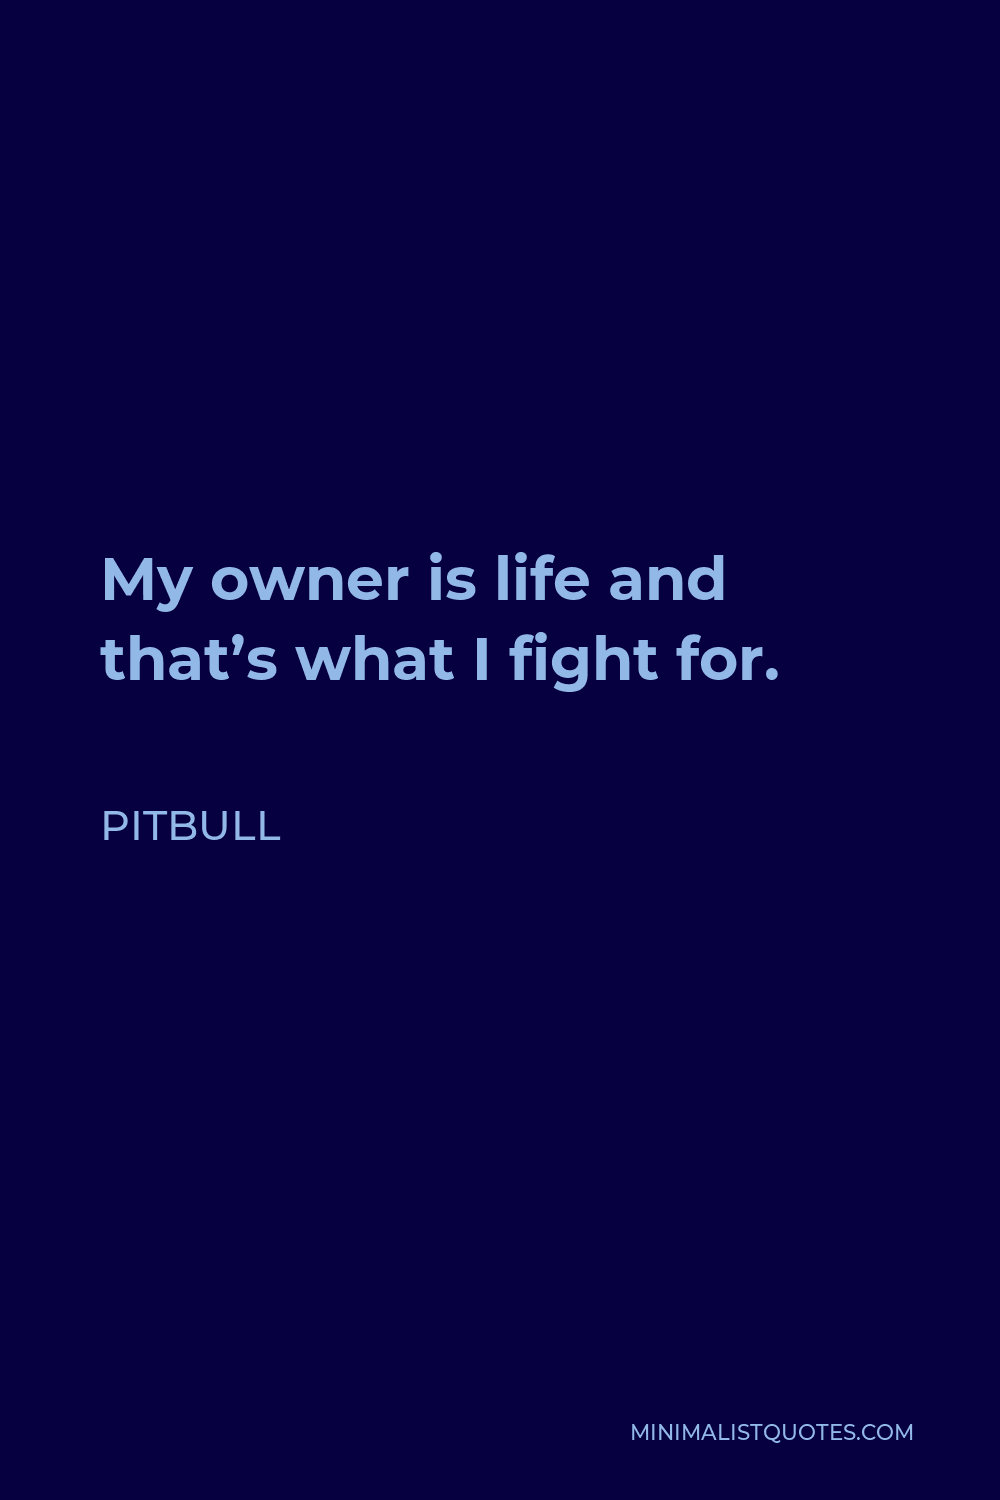 Pitbull Quote - My owner is life and that’s what I fight for.